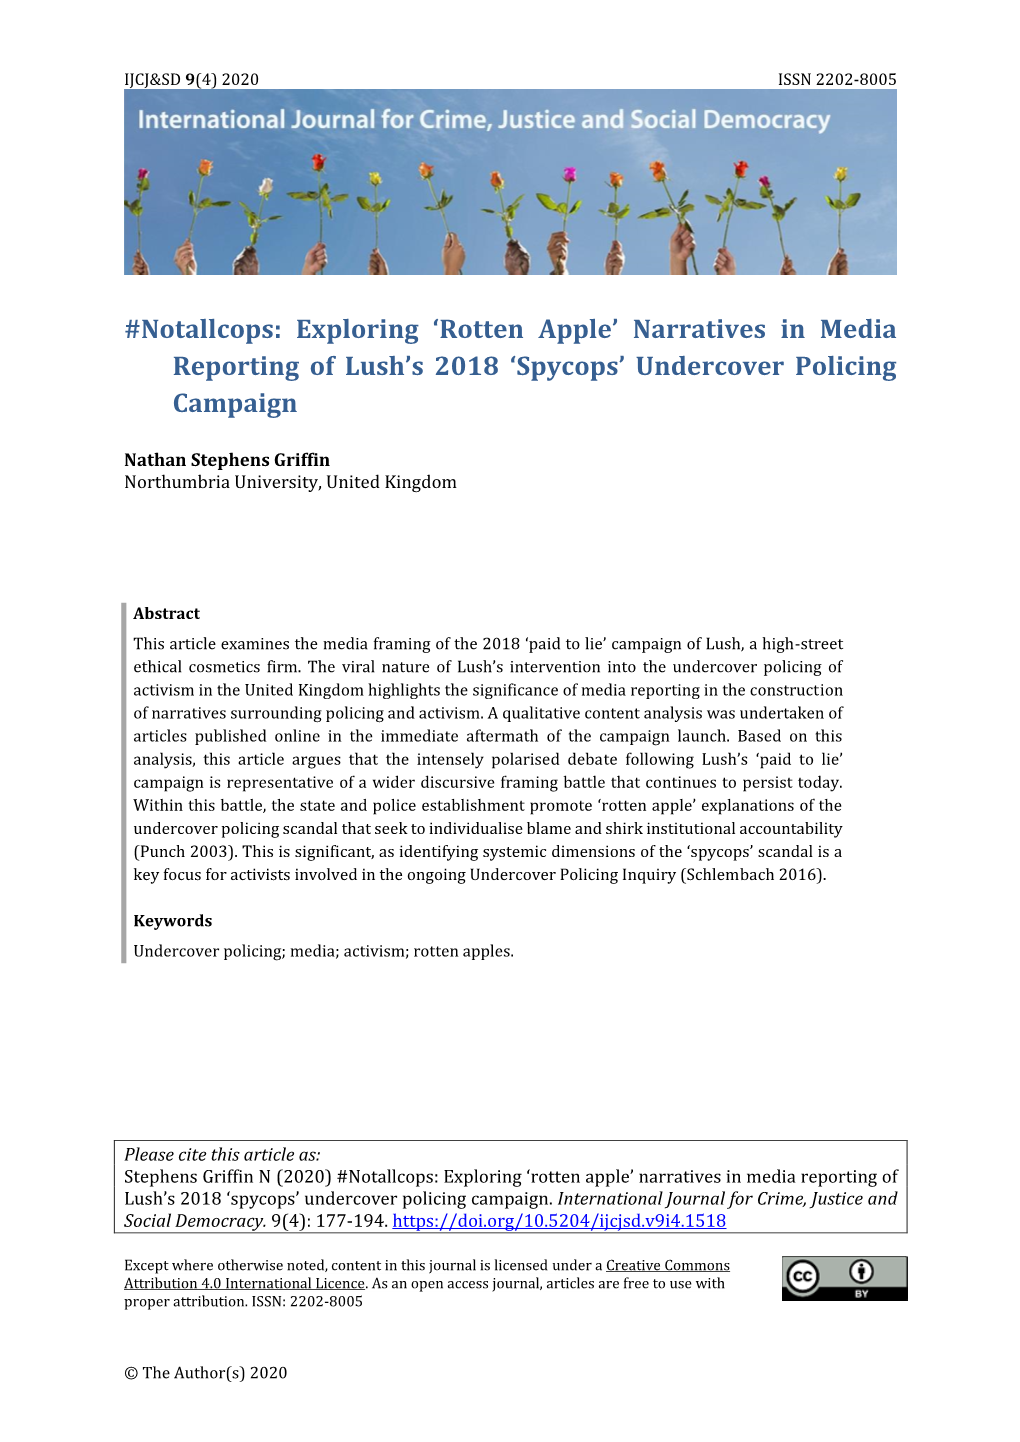 Notallcops: Exploring 'Rotten Apple' Narratives in Media Reporting of Lush's 2018 'Spycops' Undercover Policing Campa